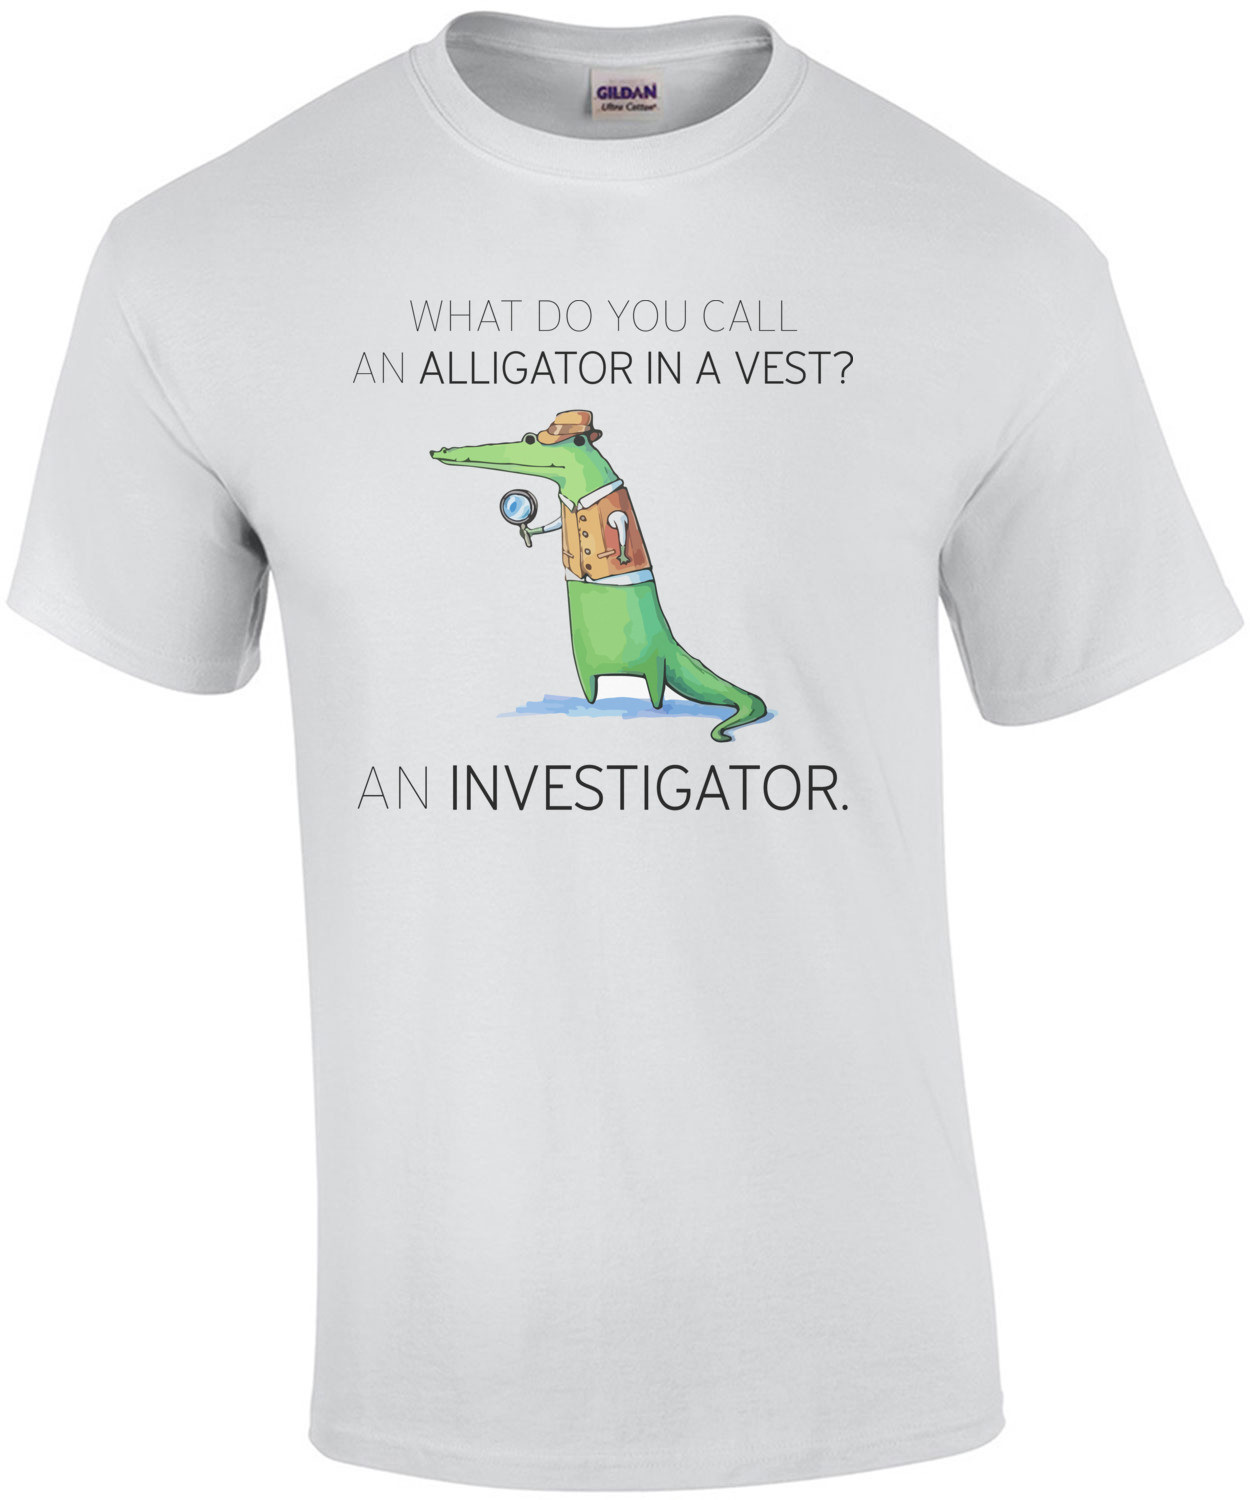 What do you call an alligator in a vest? An Investigator. Pun